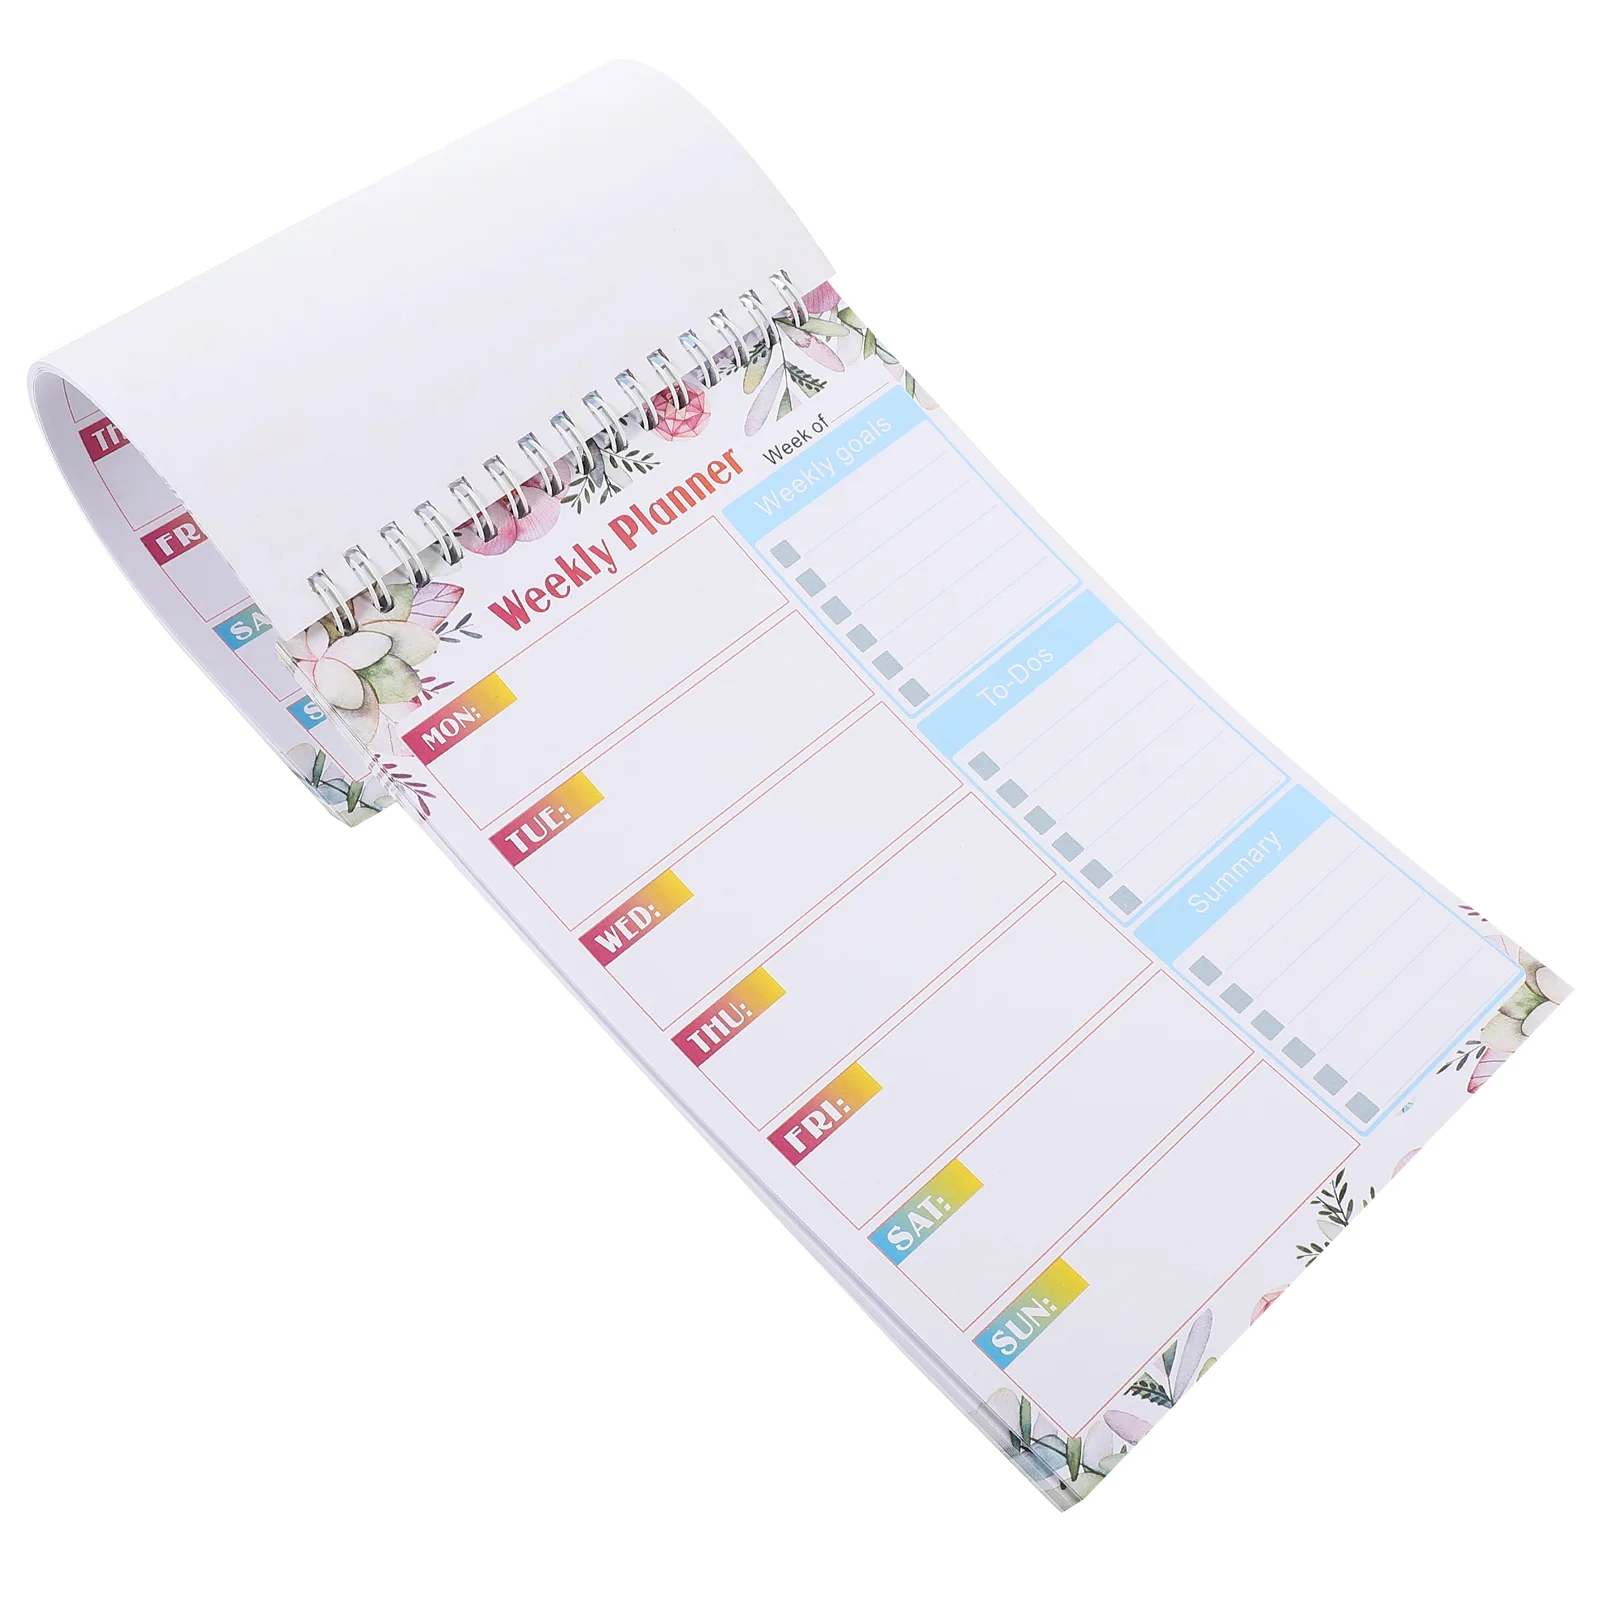 

Memo Pad Work Schedule Schedule Memo Pads To-do List Pads Tear Tabs Spiral Spiral Planner Notepad For Planning Notebook